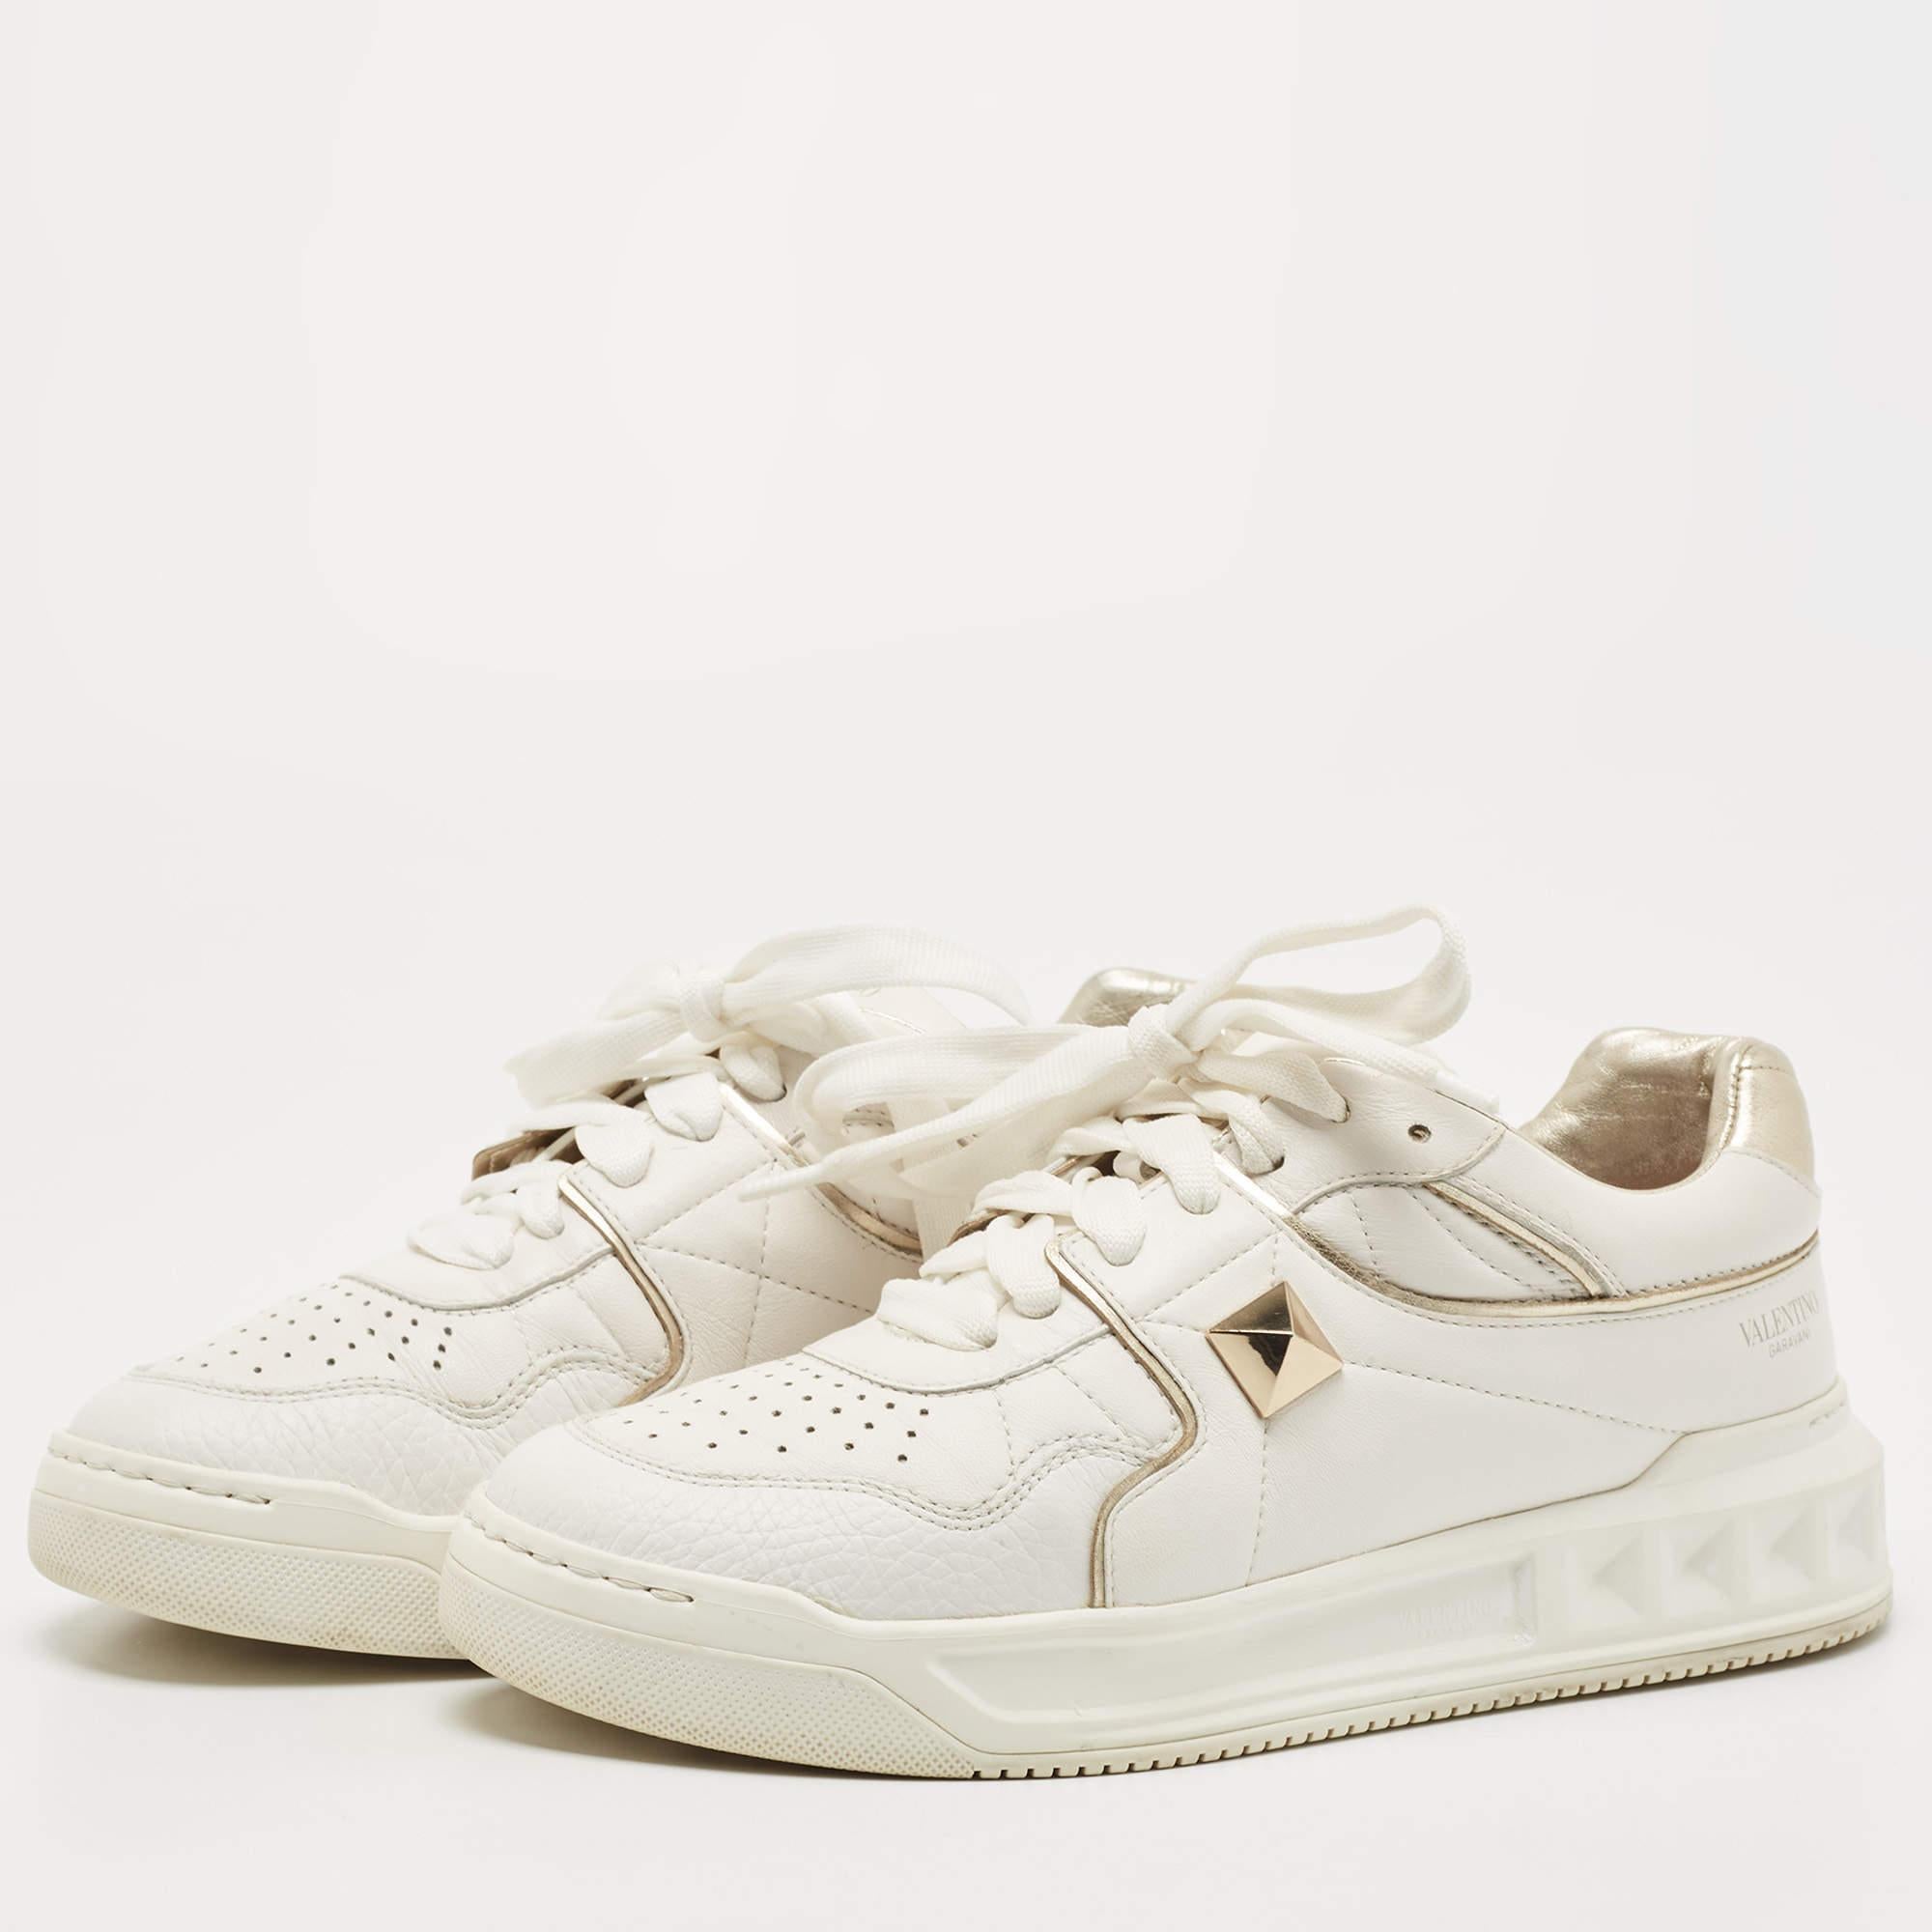 Valentino White Leather One Stud Sneakers Size 38 1